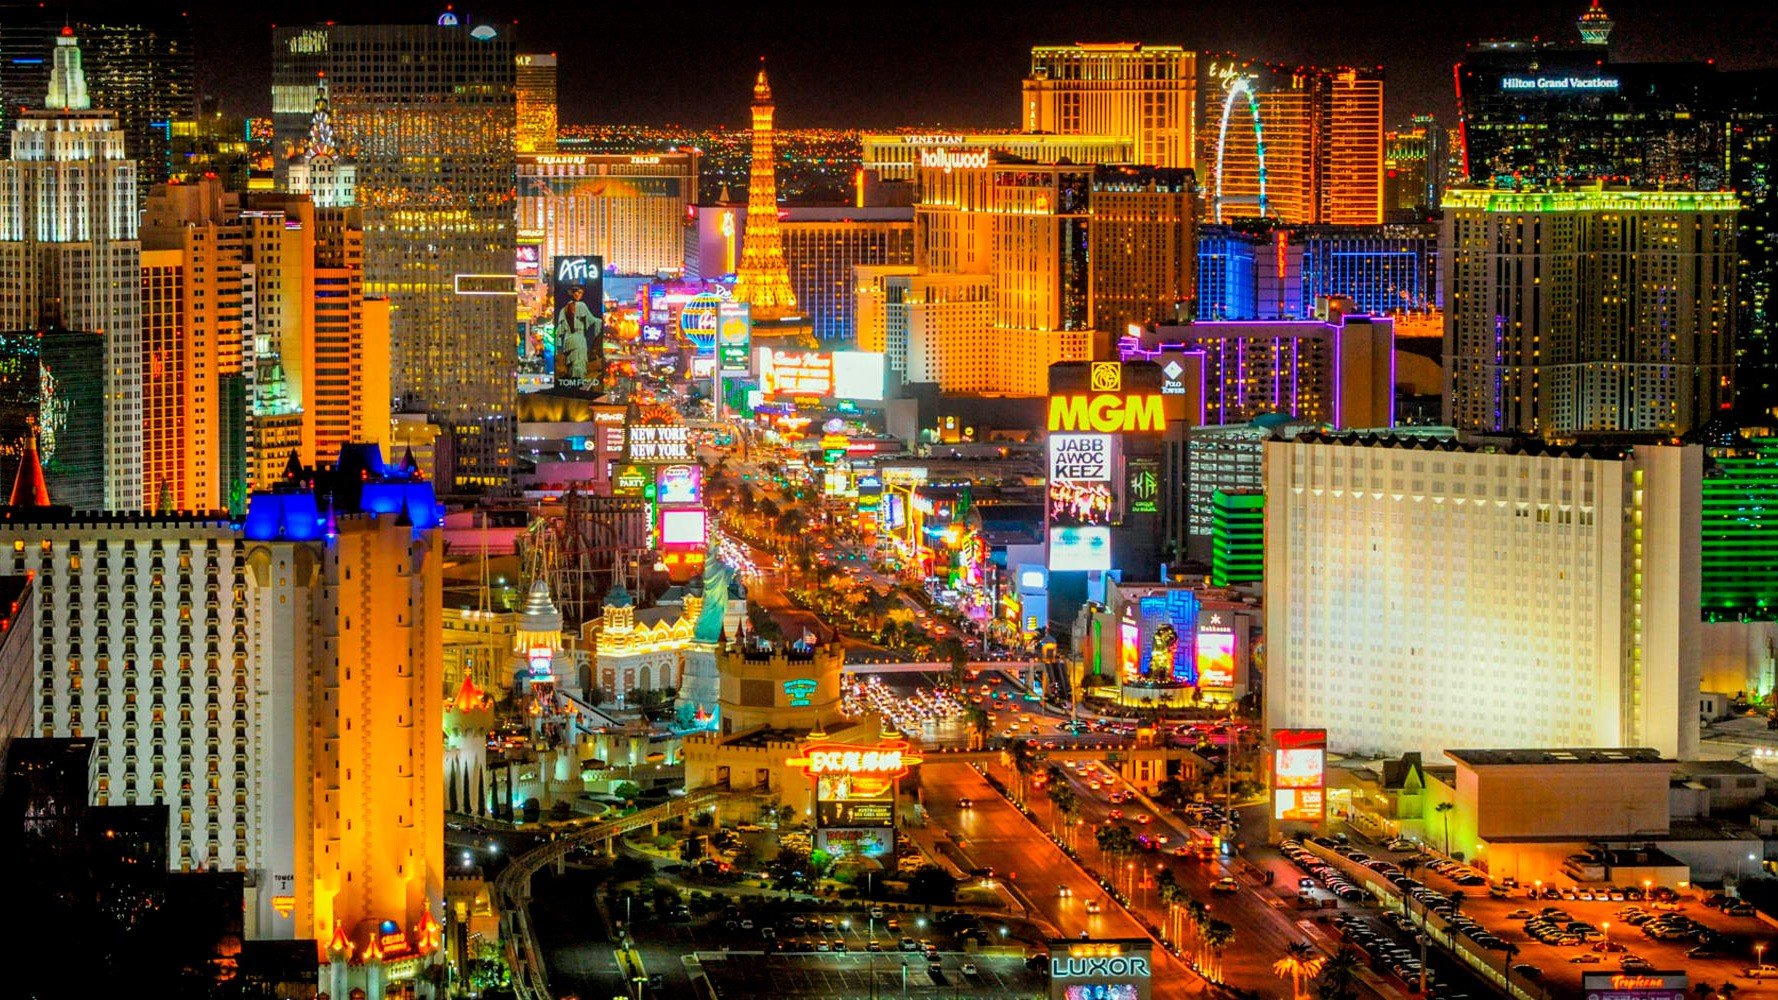 Nevada Gaming Commission approves updated cybersecurity regulation